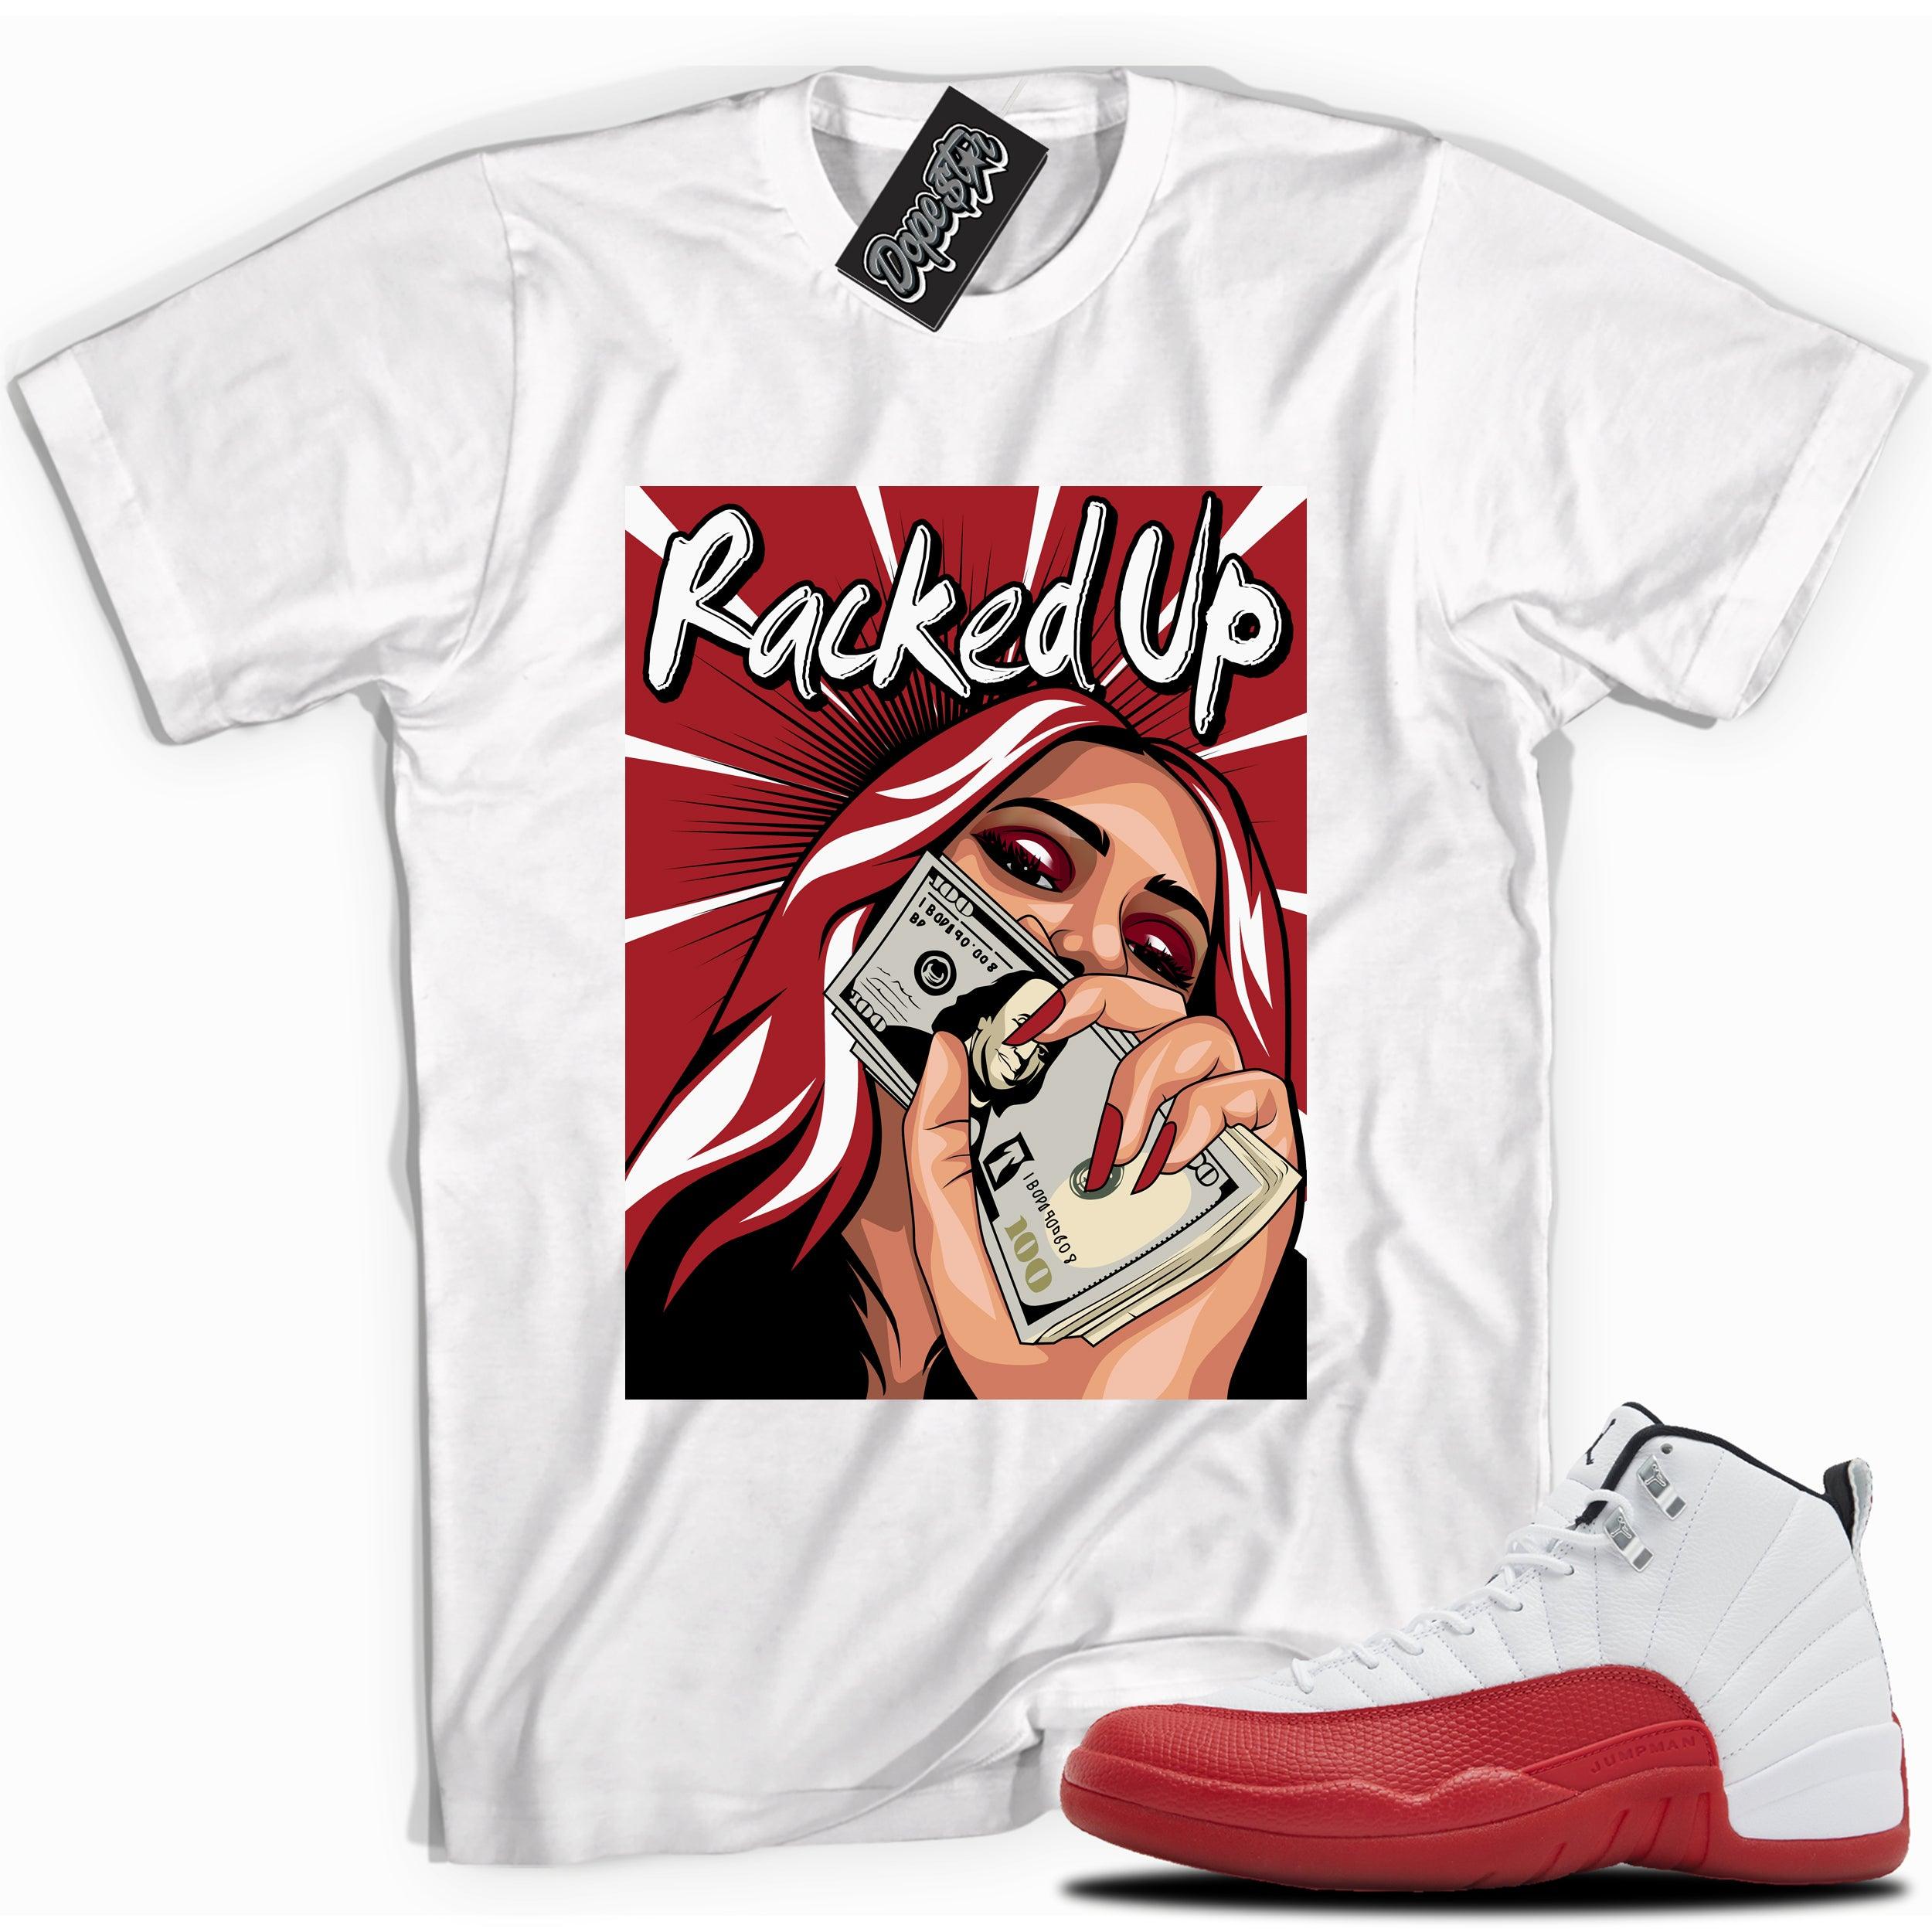 Cool White graphic tee with “RACKED UP” print, that perfectly matches Air Jordan 12 Retro Cherry Red 2023 red and white sneakers